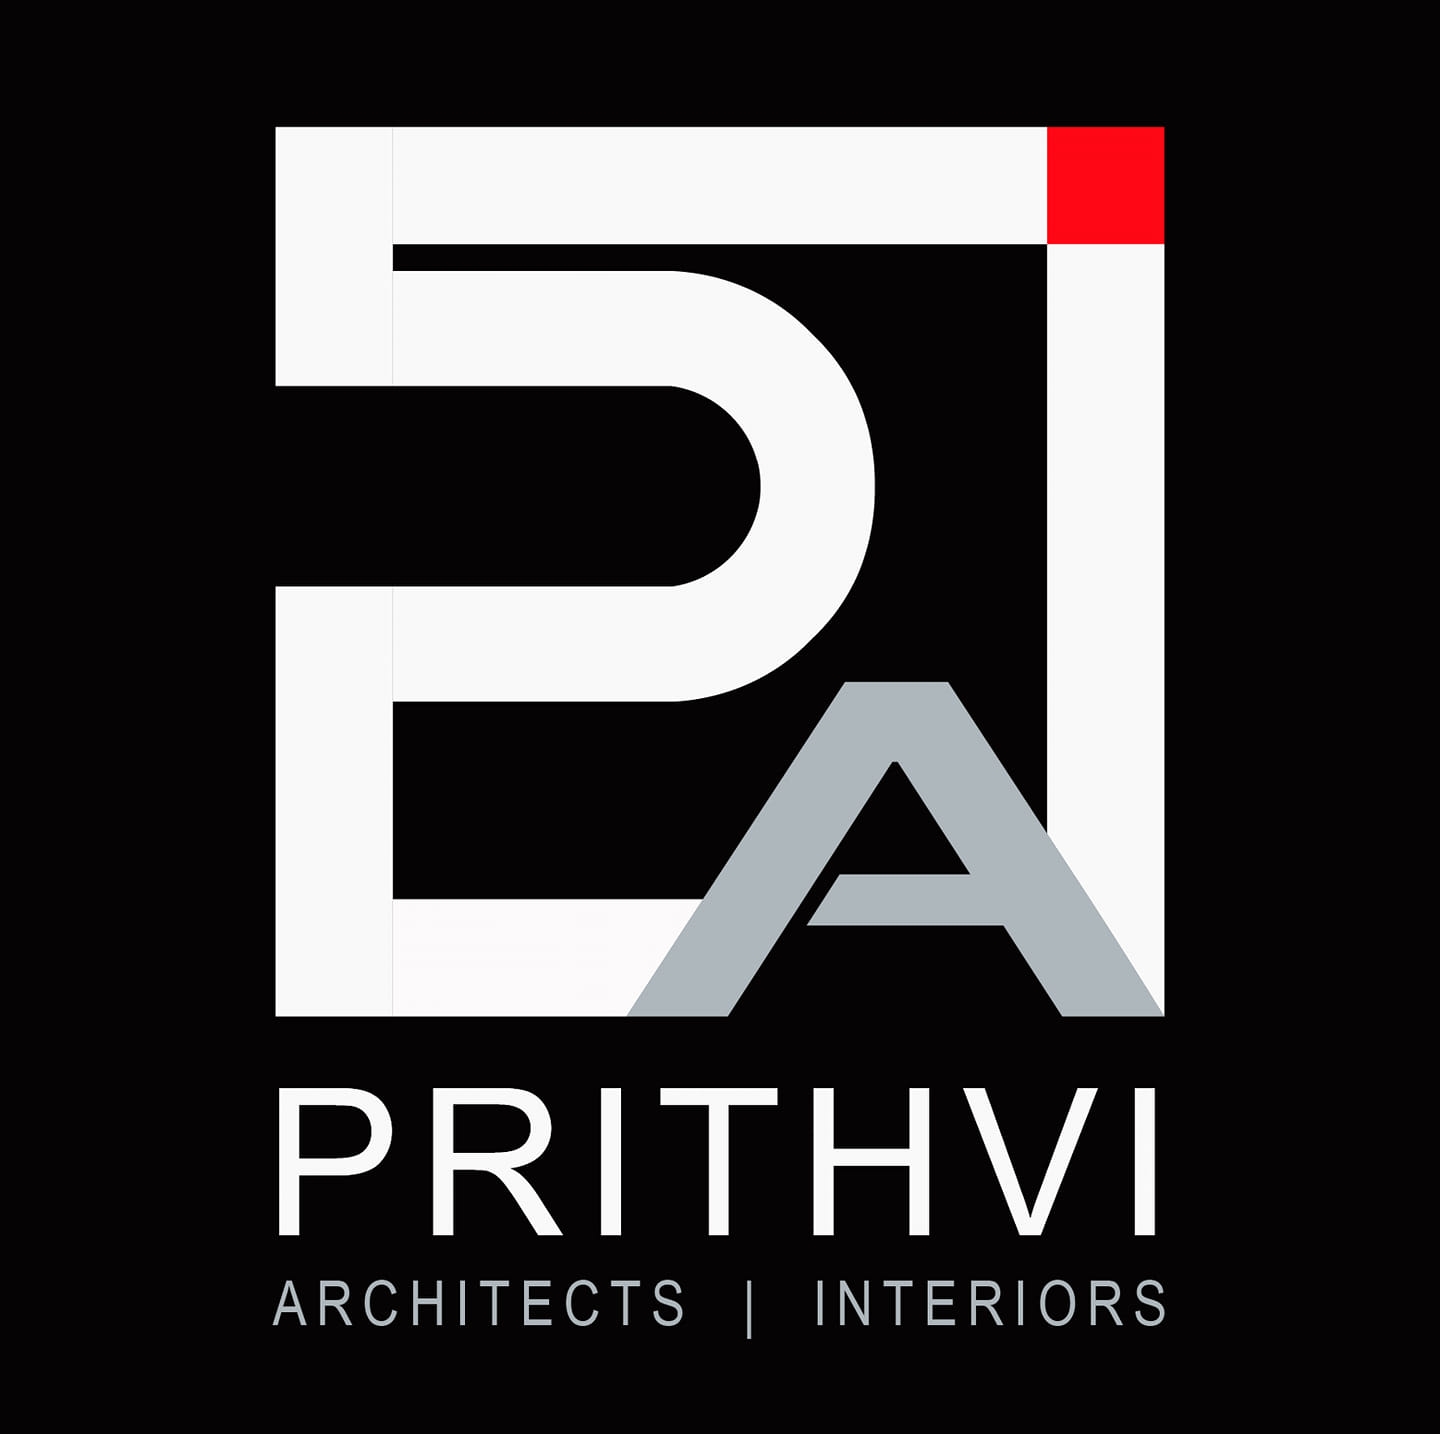 Prithvi Architects & Interiors|Accounting Services|Professional Services